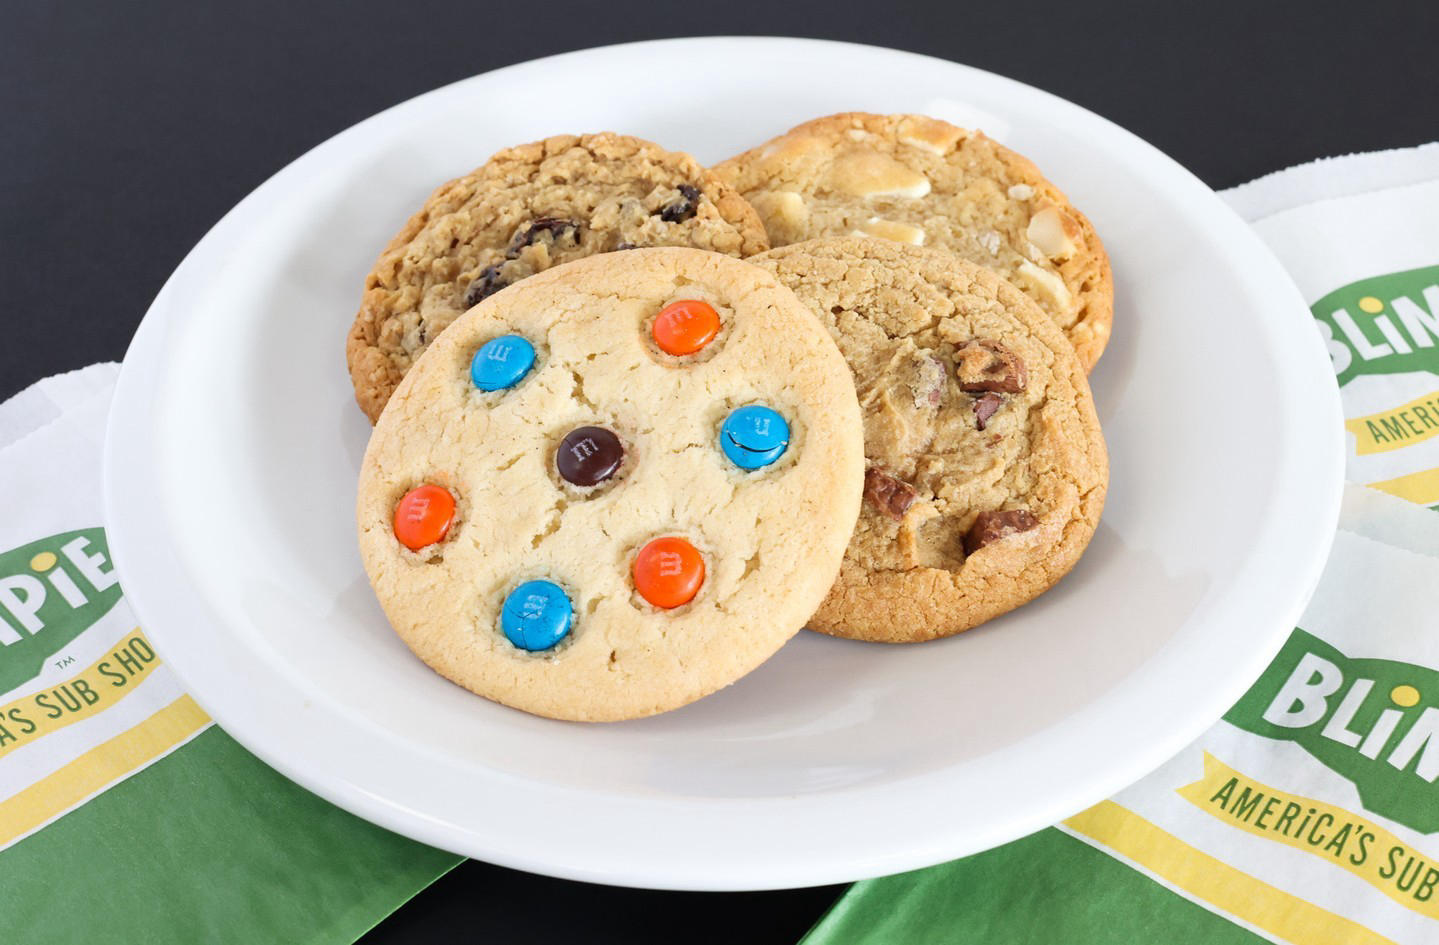 Blimpie - Pairing our fresh baked cookies with your sub